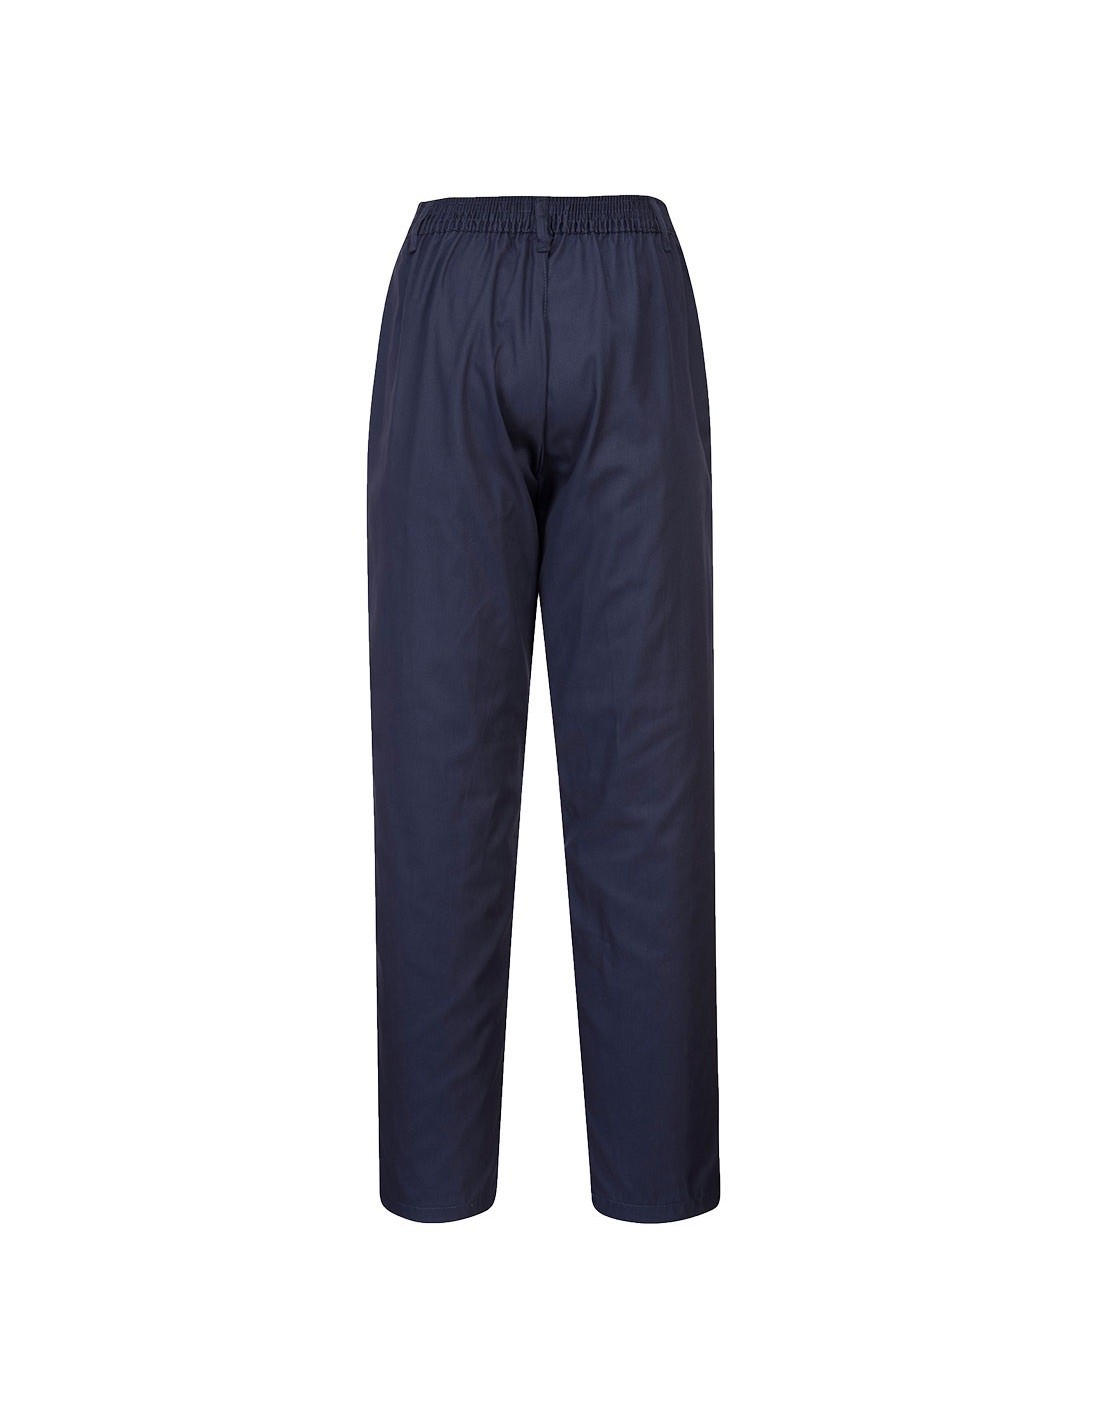 Portwest LW97 Ladies Elasticated Trouser - Sizes XS to 4XL